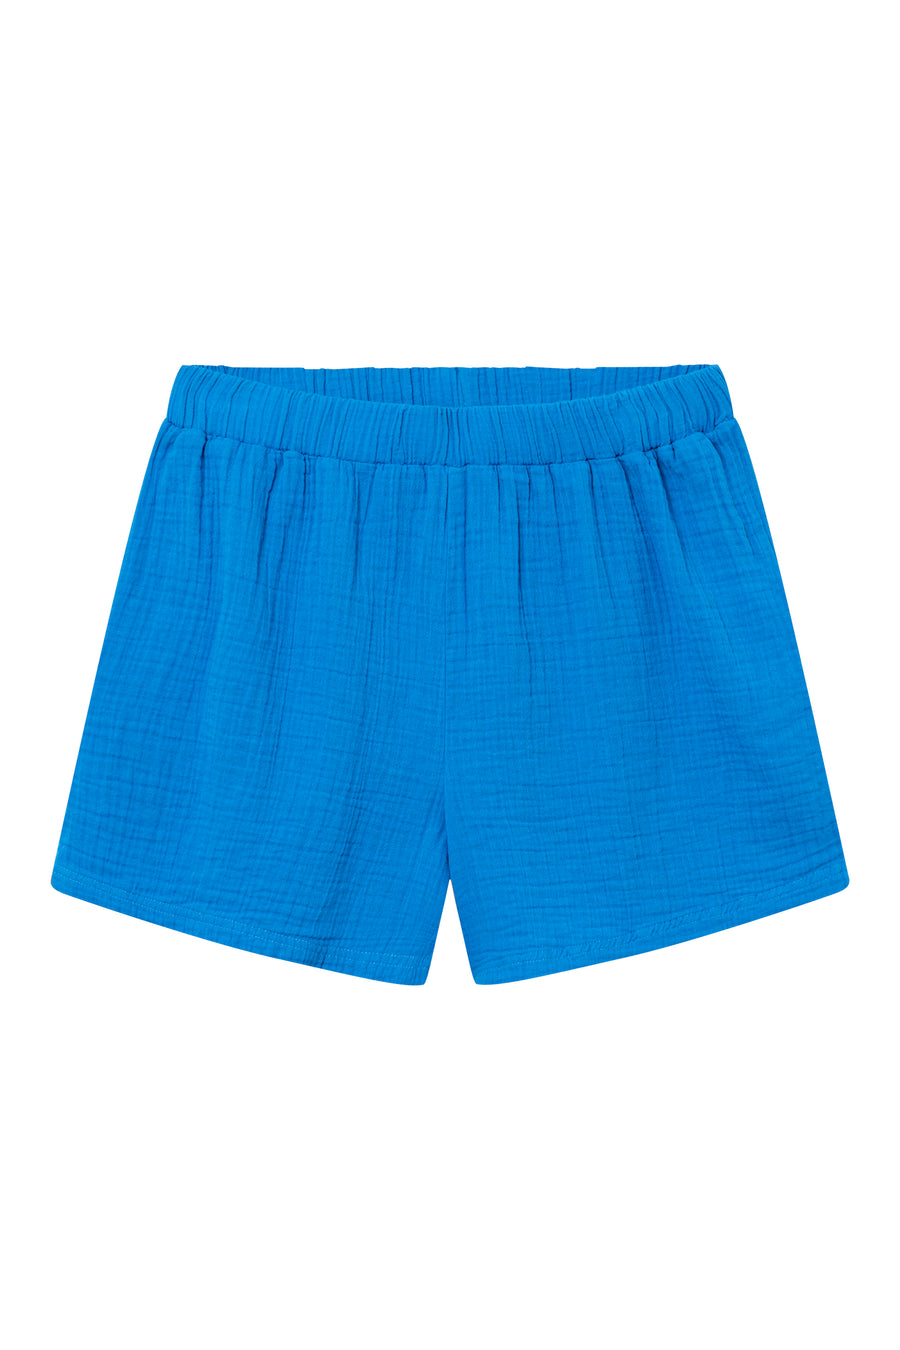 GIVN Shorts Cleo French Blue (Musselin) Bio-Baumwolle